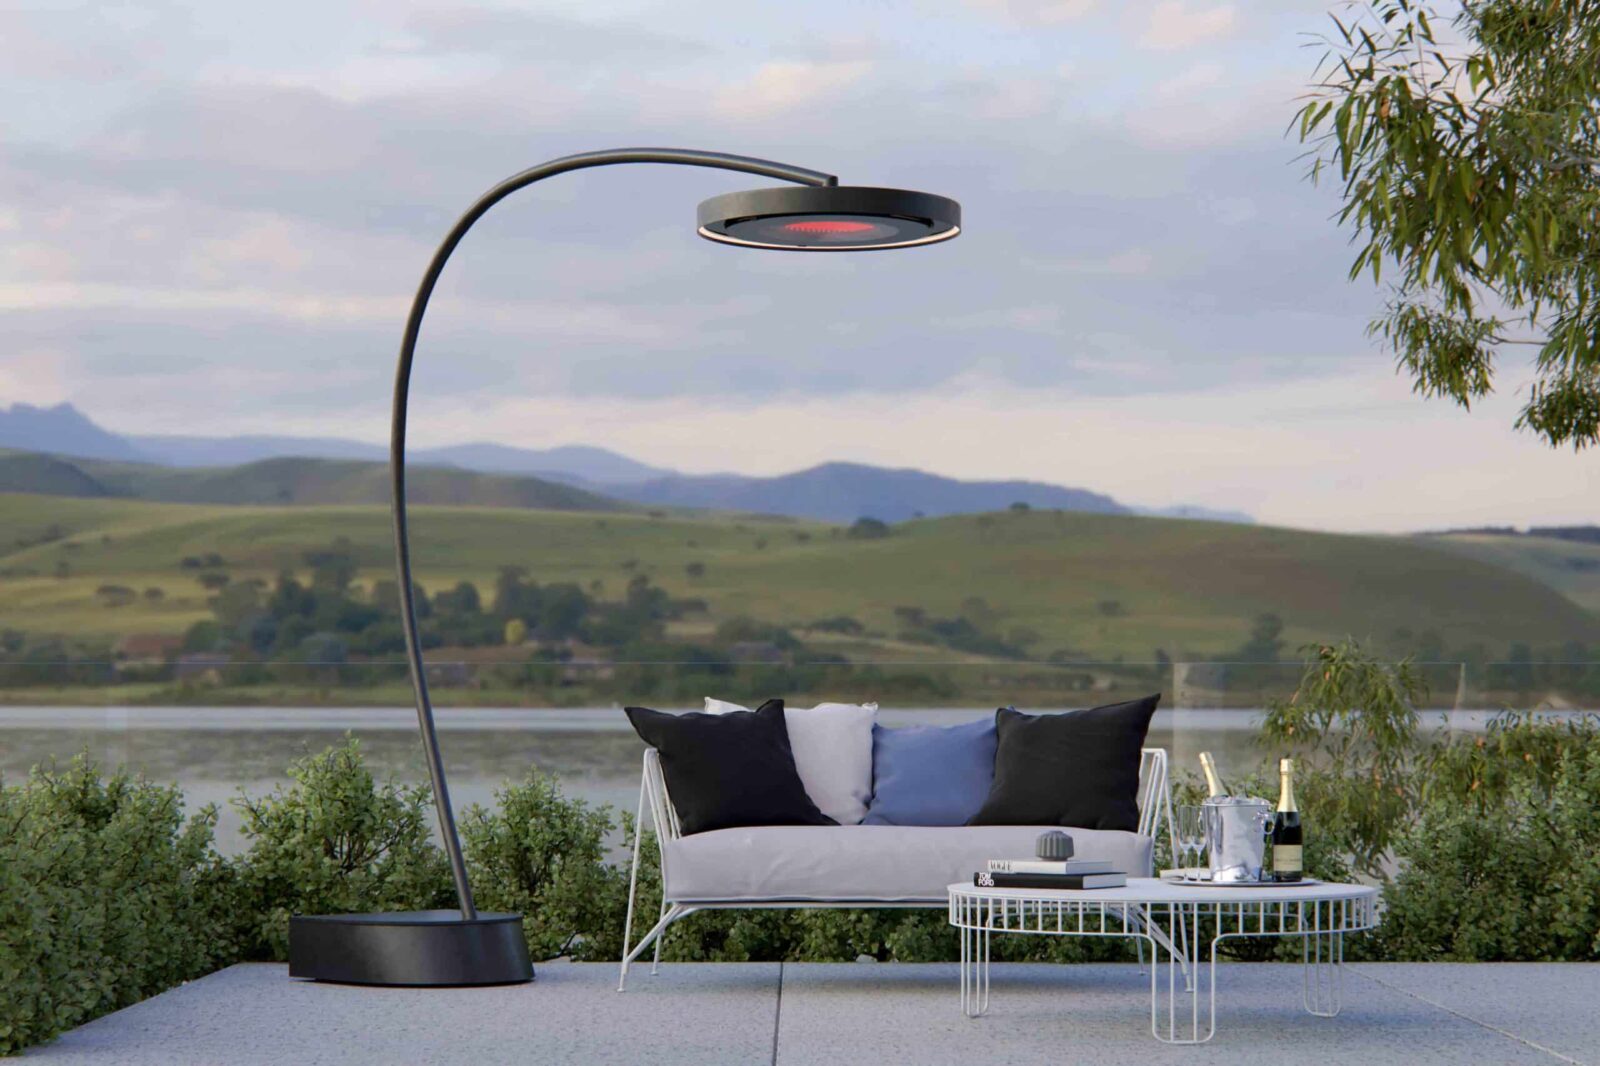 Portable Outdoor Heater next to lounge and table